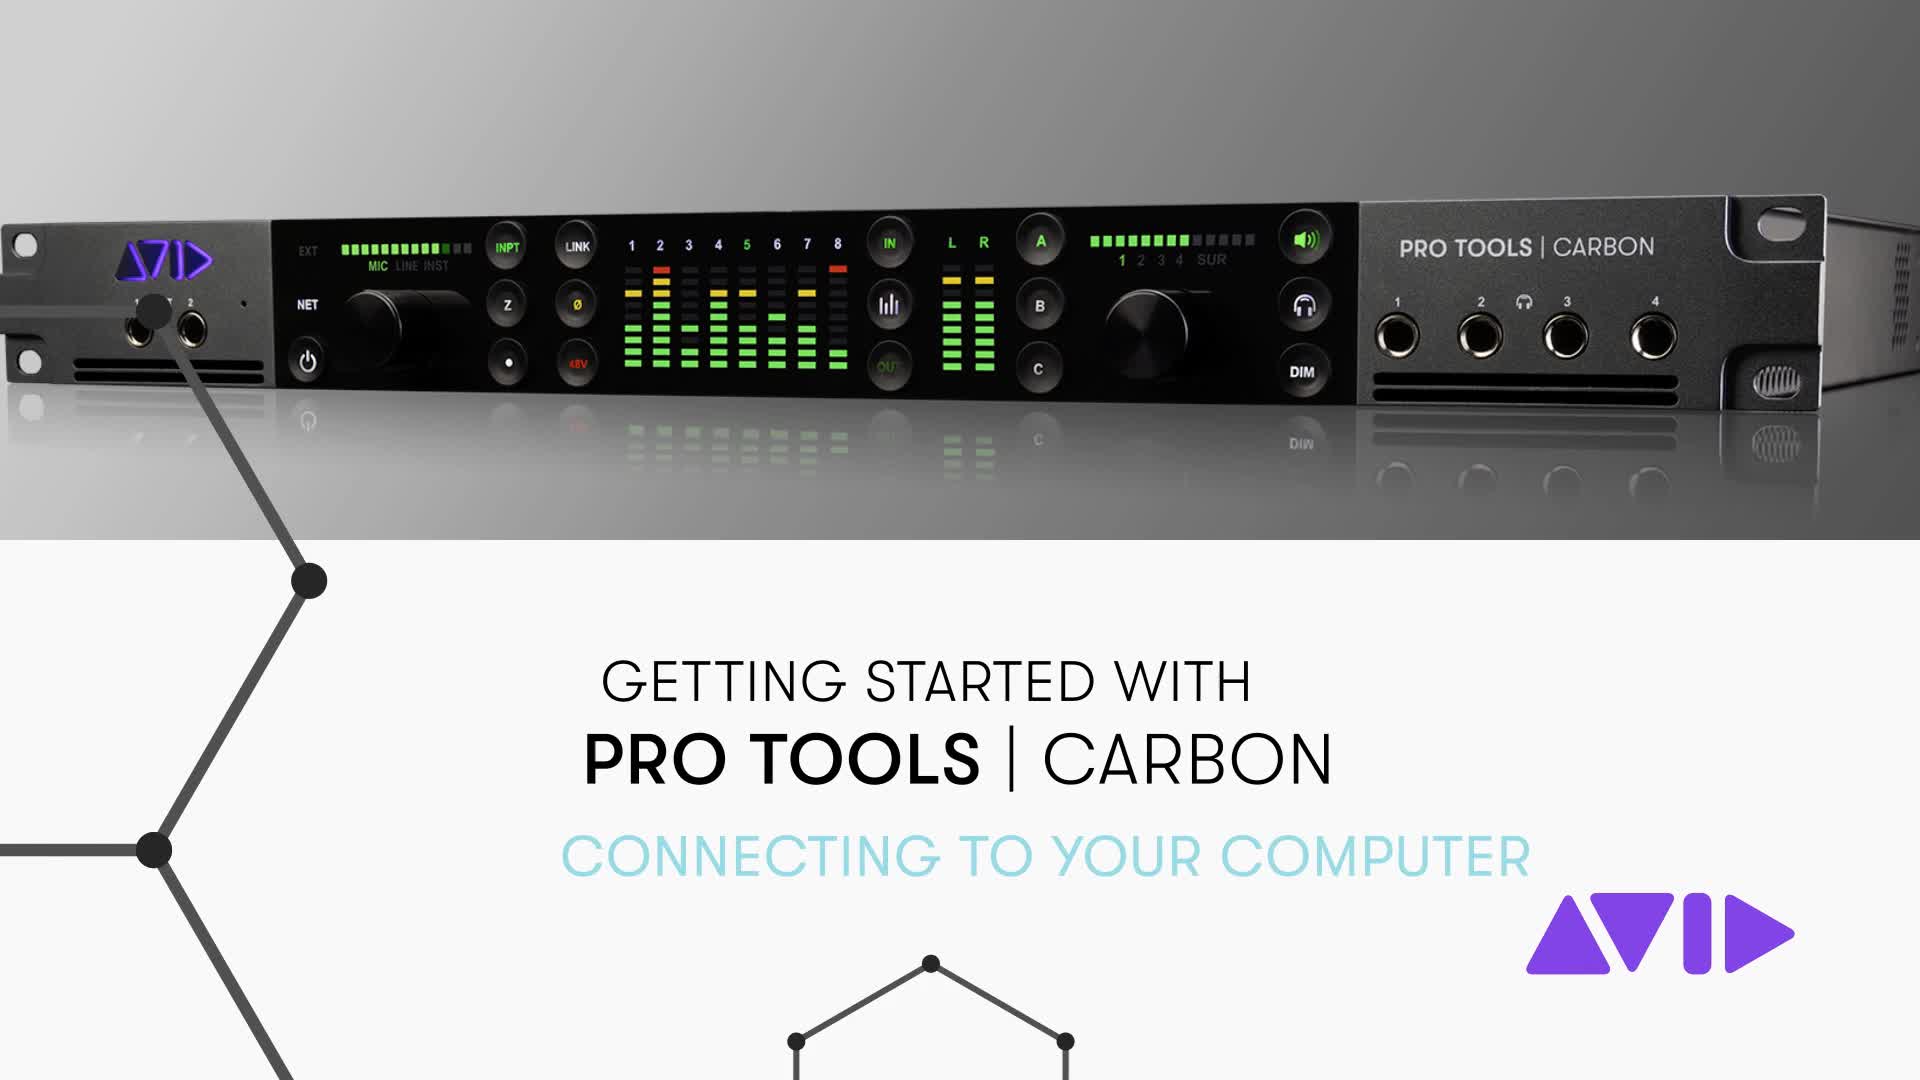 03 Pro Tools Carbon Getting Started - Connecting to Your Computer